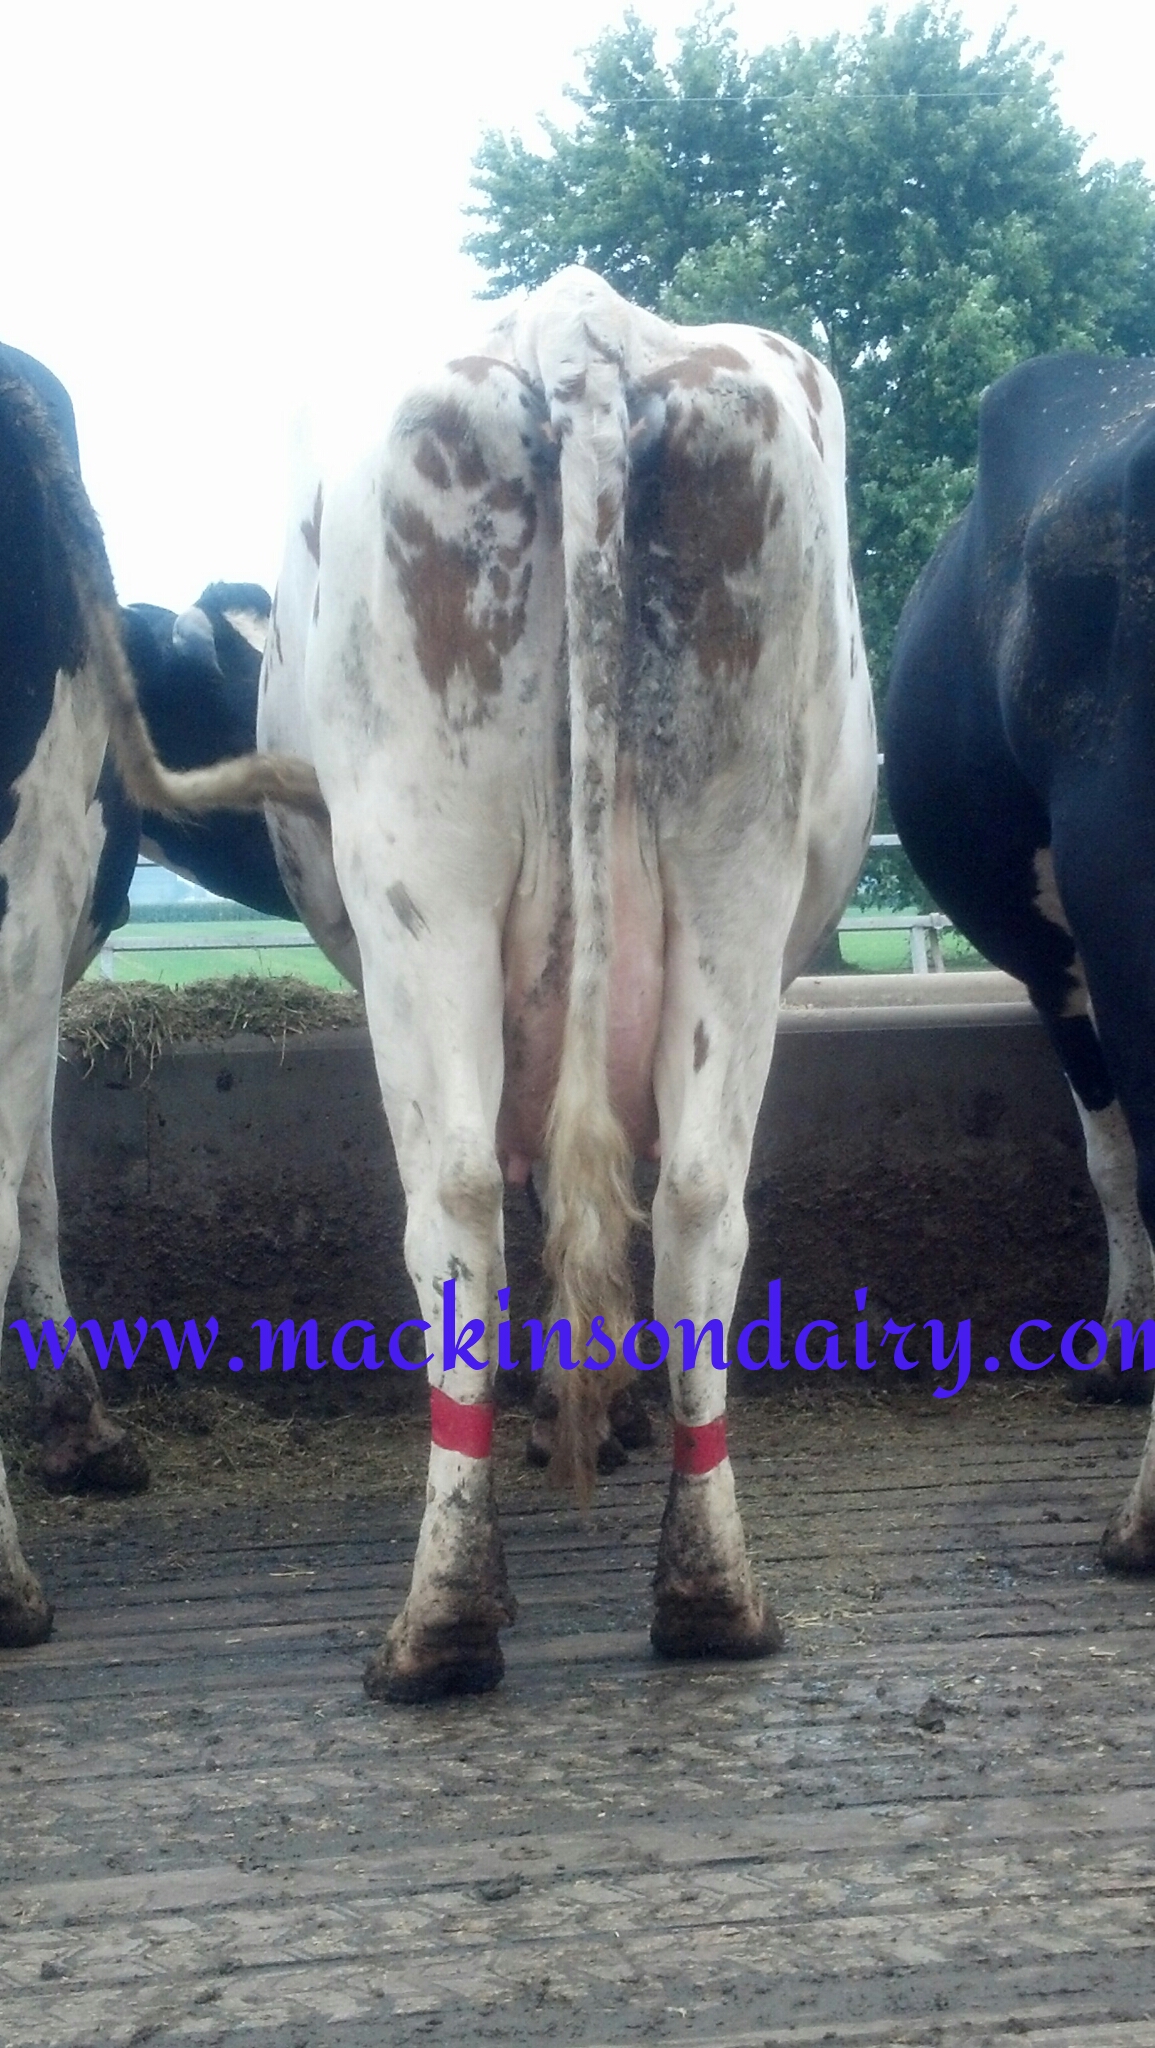 Cow that has been treated with antibiotics.